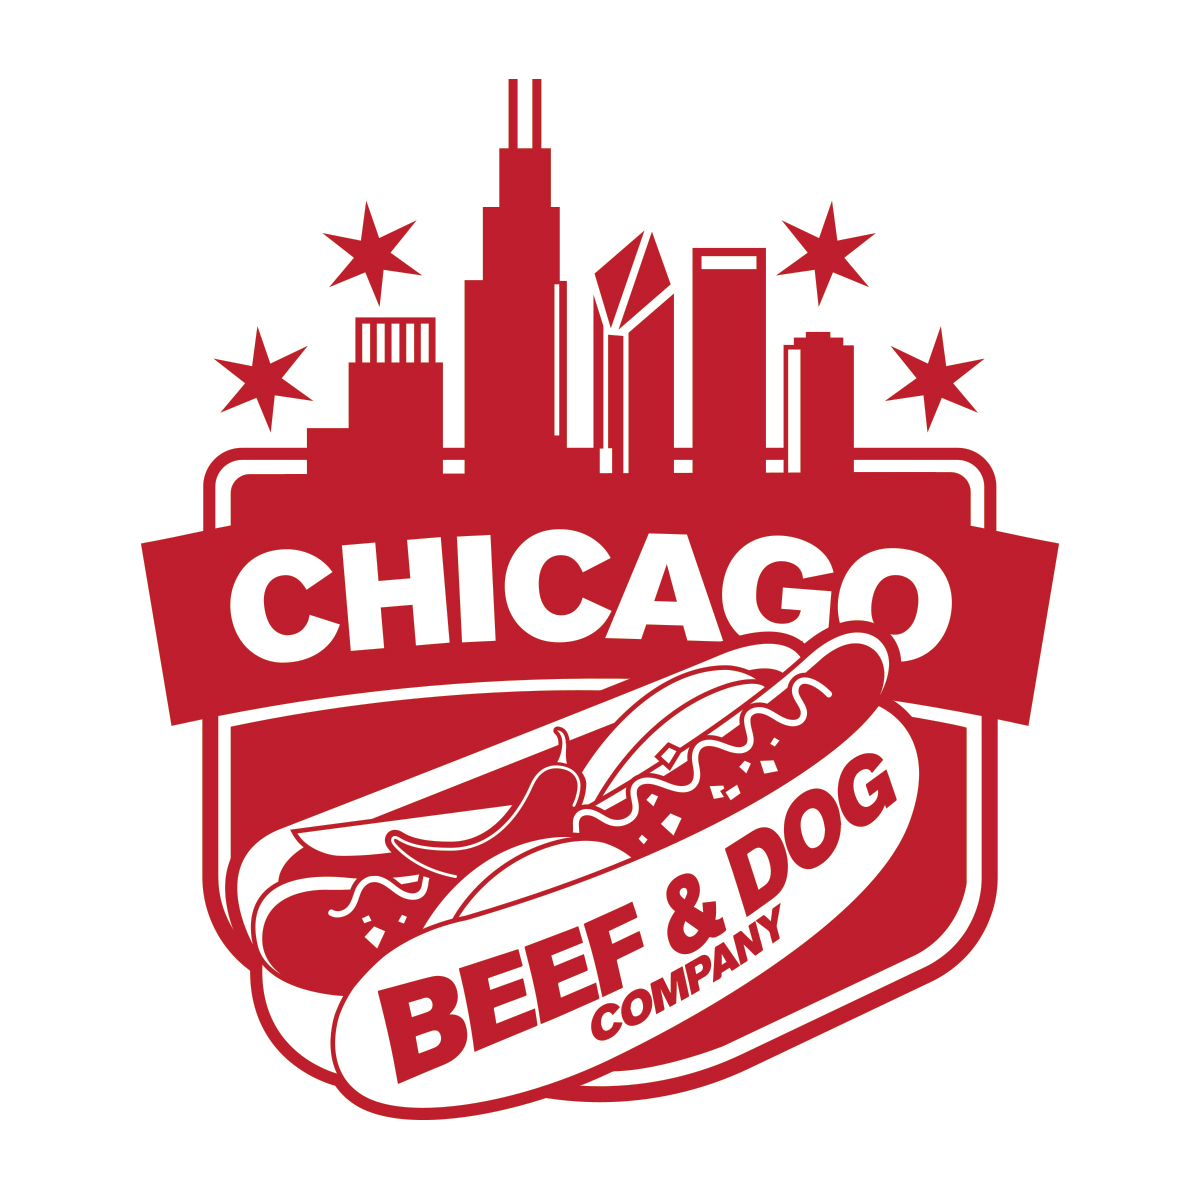 Chicago Beef and Dog co-